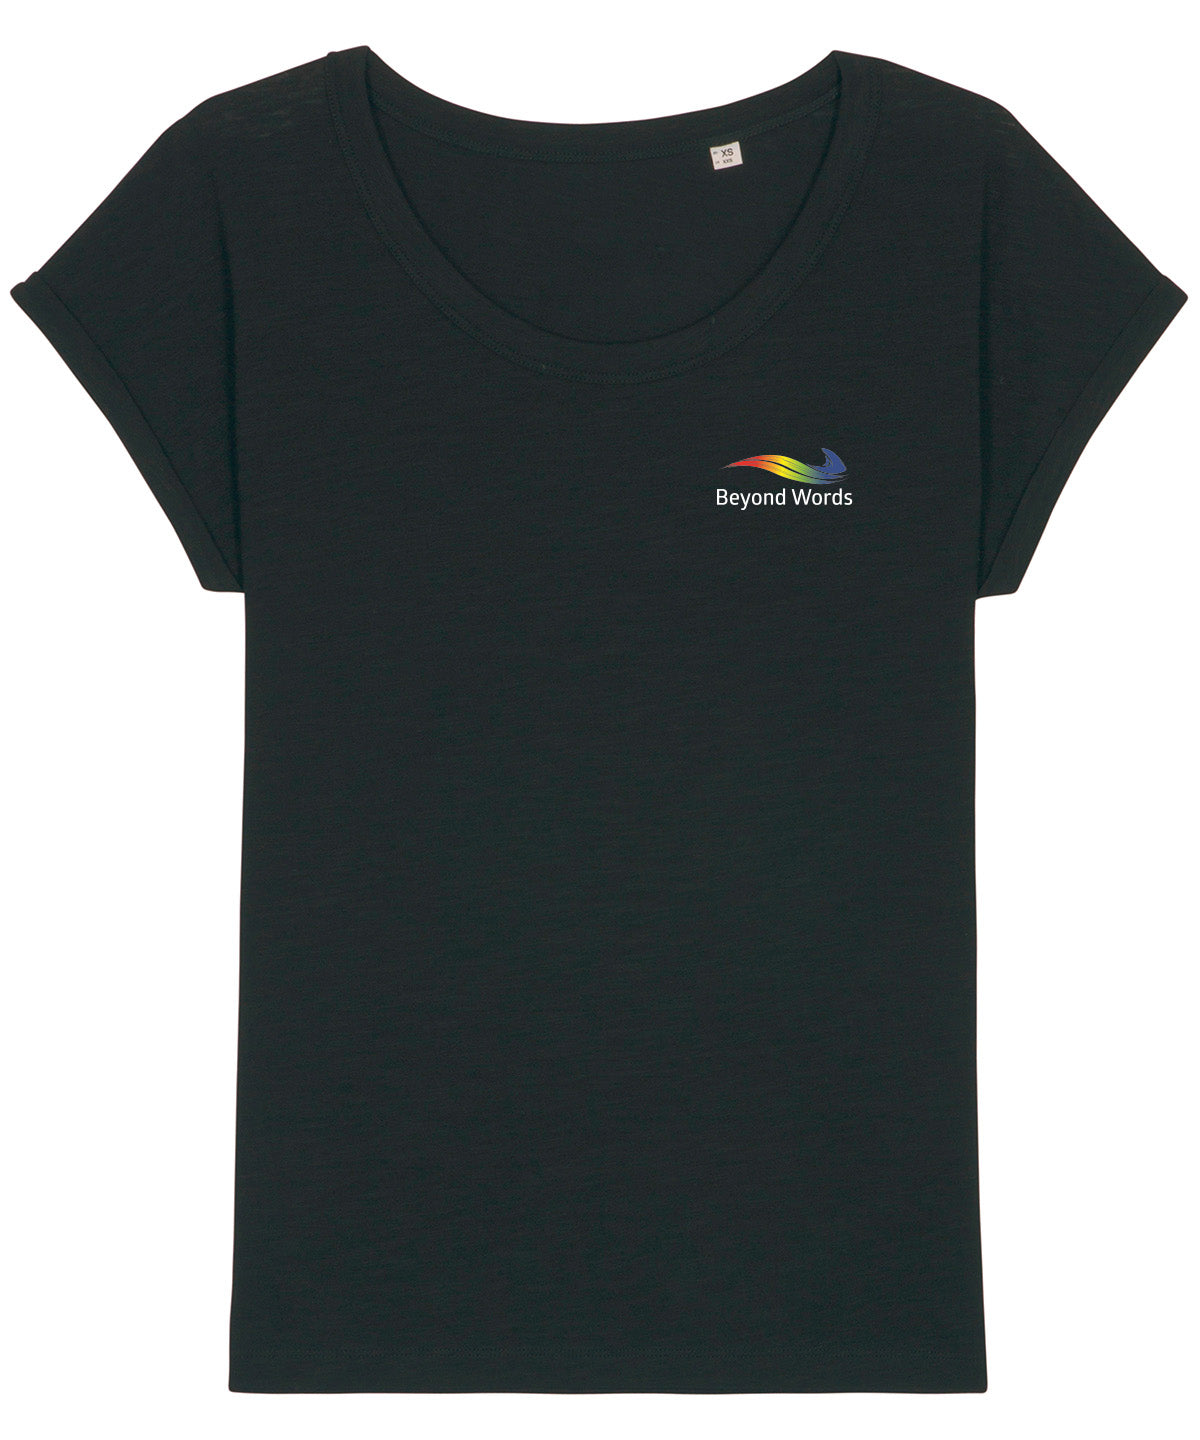 Women's Relaxed Fit T-shirt for Beyond Words